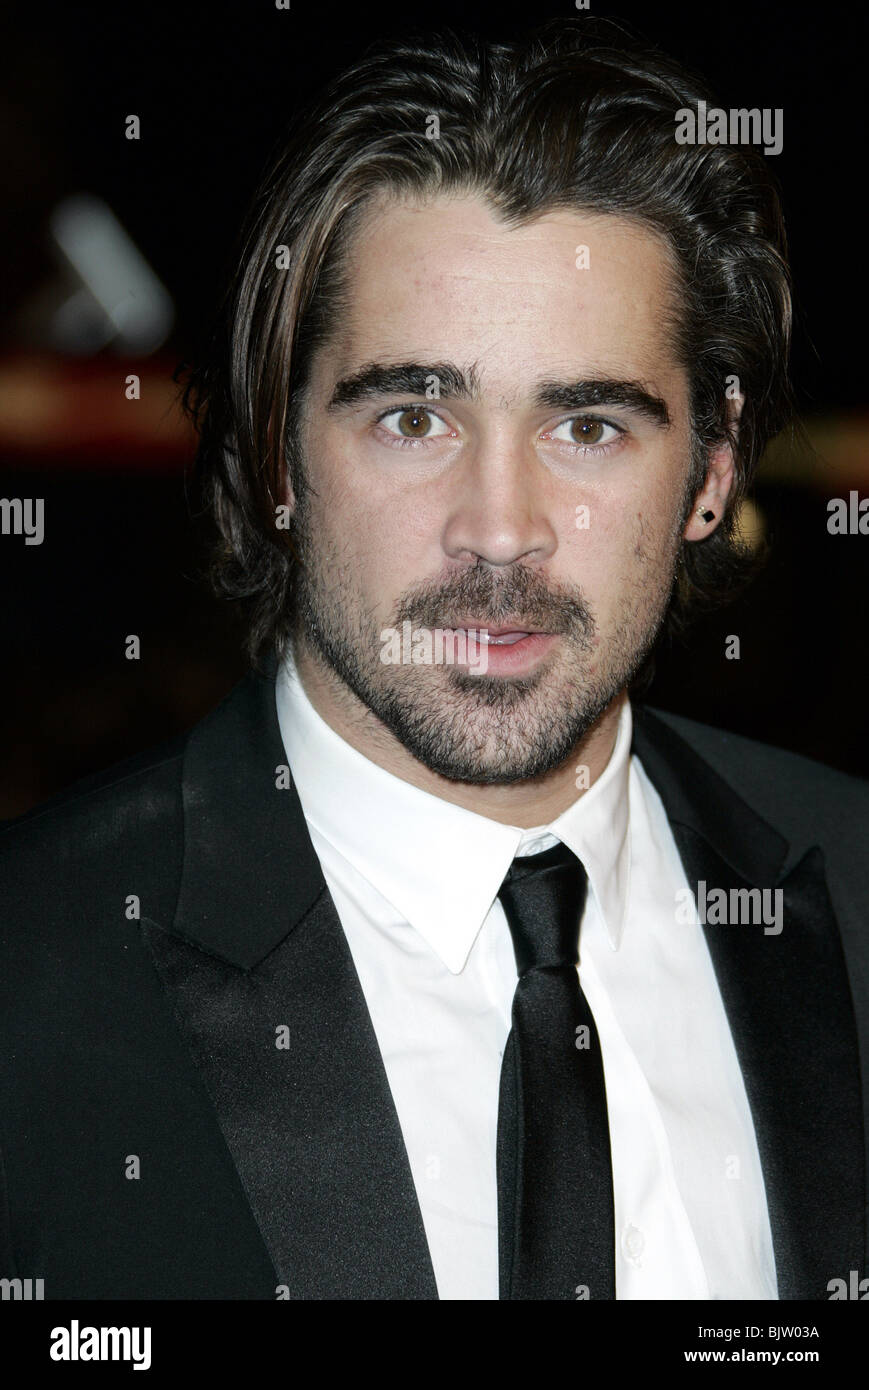 COLIN FARRELL ALEXANDER WORLD PREMIERE GRUMANN'S CHINESE THEATRE HOLLYWOOD LOS ANGELES USA 16 November 2004 Stock Photo